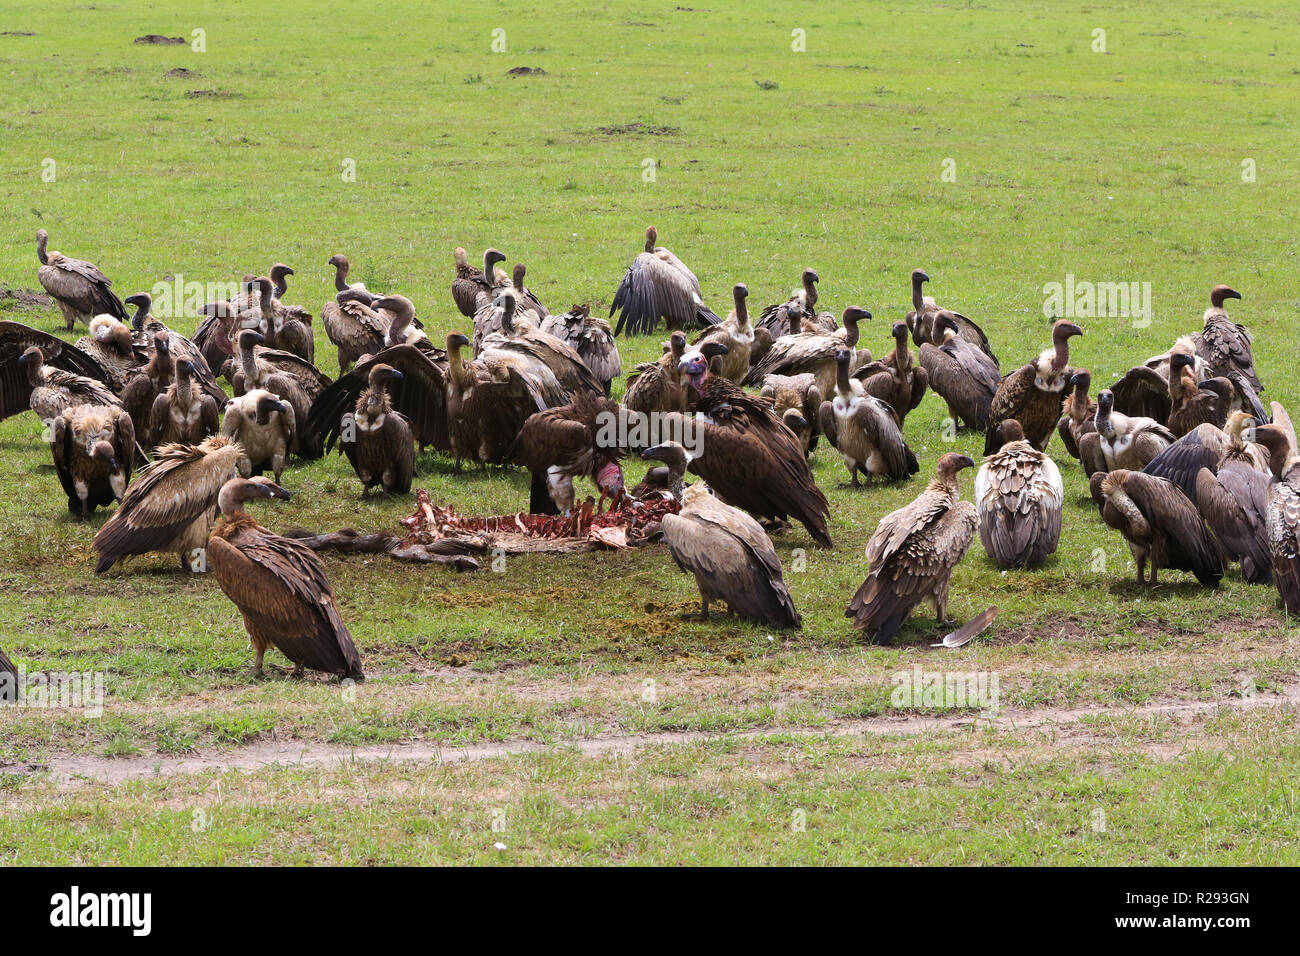 Vultures are scavenging off a wildebeest carcass from a kill by five cheetahs in Masai Mara Game Park, Narok County, Kenya. Stock Photo